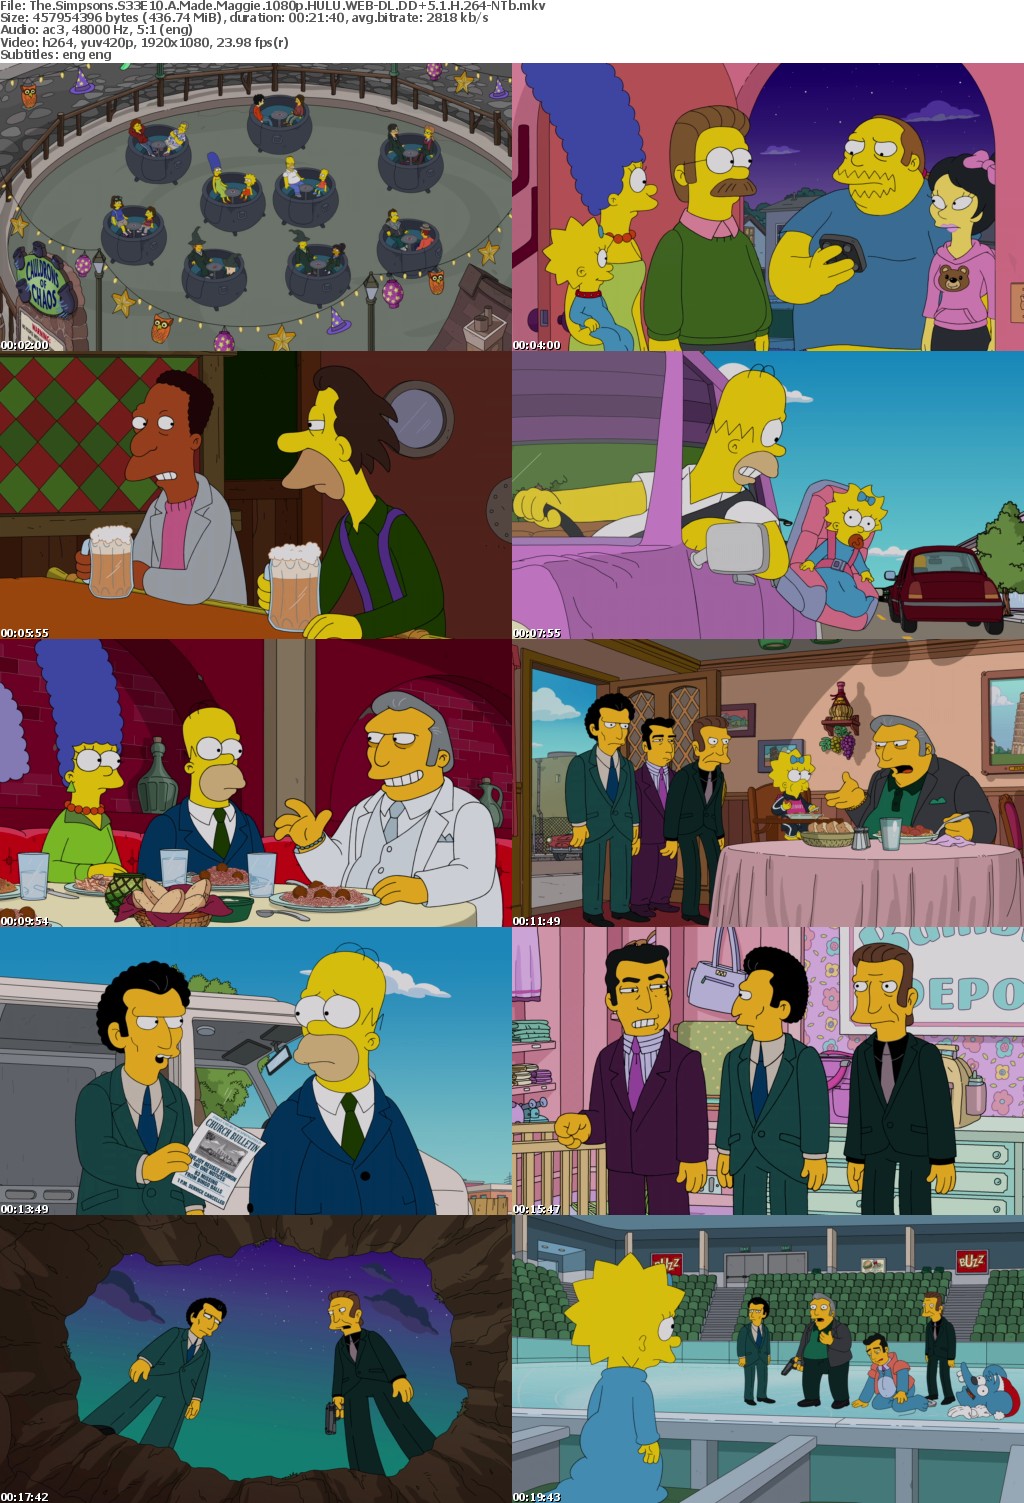 The Simpsons S33E10 A Made Maggie 1080p HULU WEBRip DDP5 1 x264-NTb